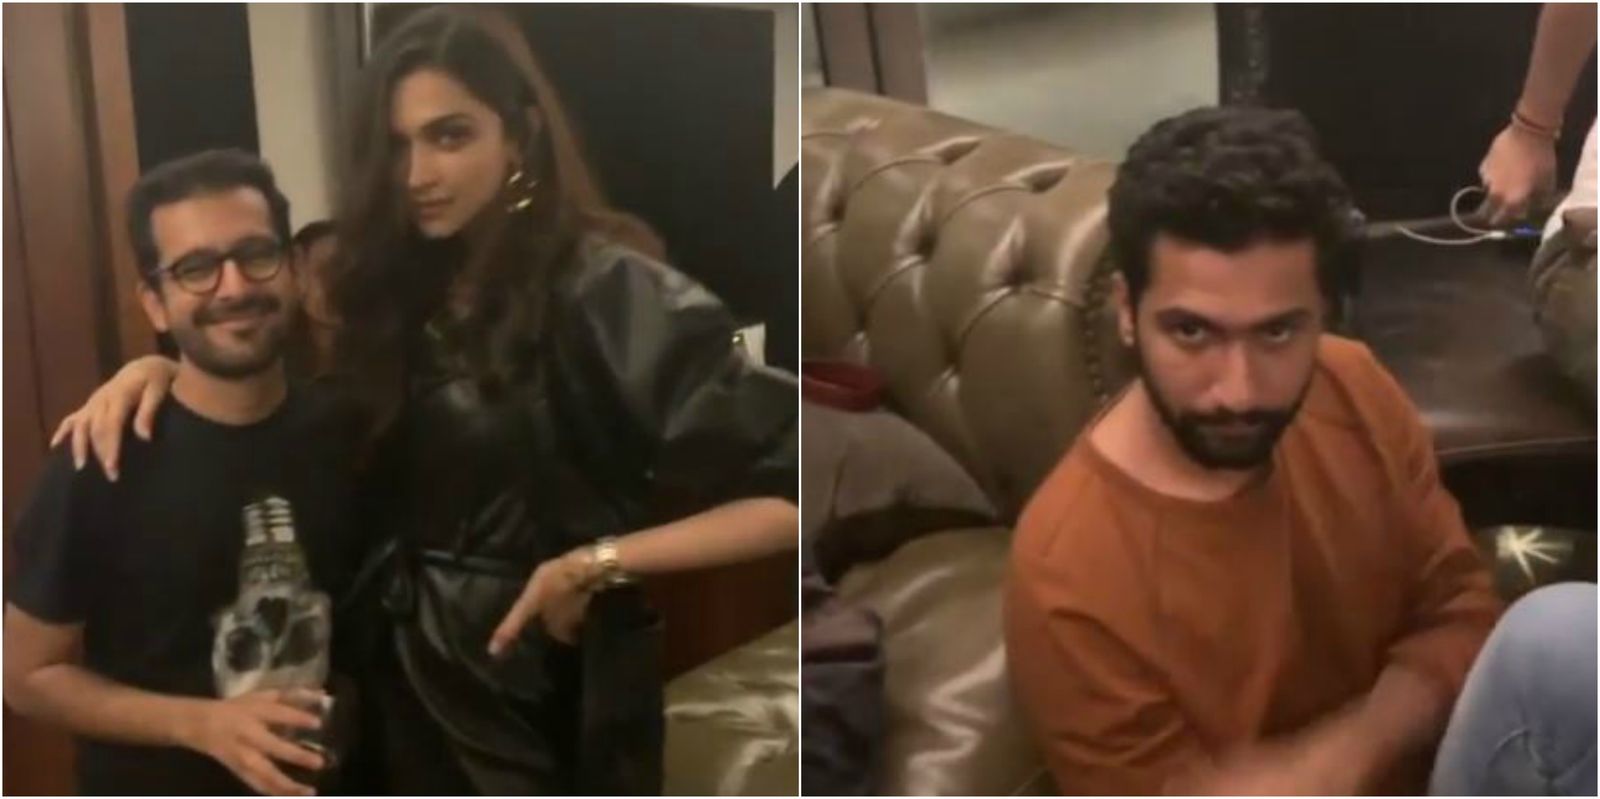 Karan Johar Recording A Video As Deepika, Vicky, Ranbir And Everyone Looks Super Drunk Is Every House Party Ever